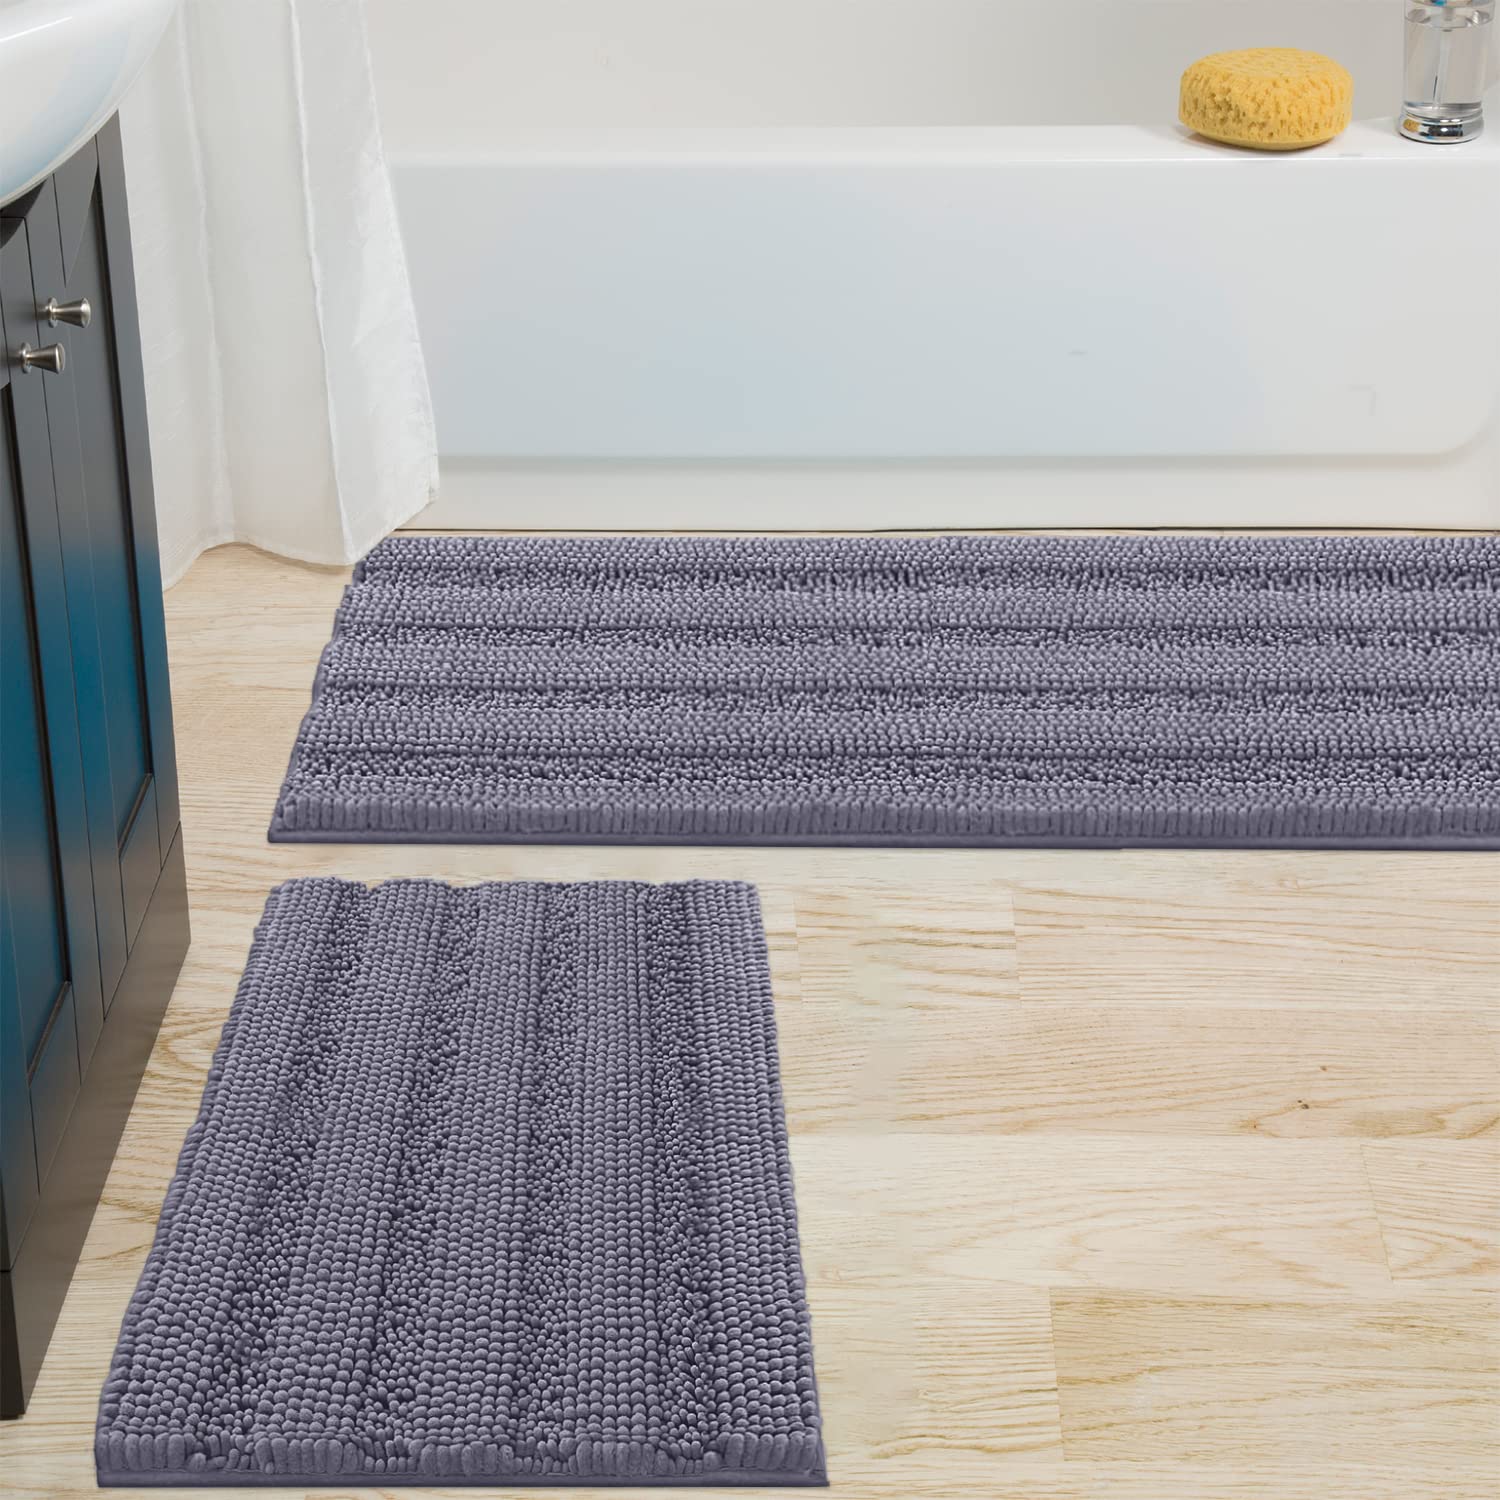 Zebrux Non Slip Thick Shaggy Chenille Bathroom Rugs, Bath Mats for Bathroom Extra Soft and Absorbent - Striped Bath Rugs Set for Indoor/Kitchen (15 x 24 + 27 x 47'', Dark Gray)  - Like New